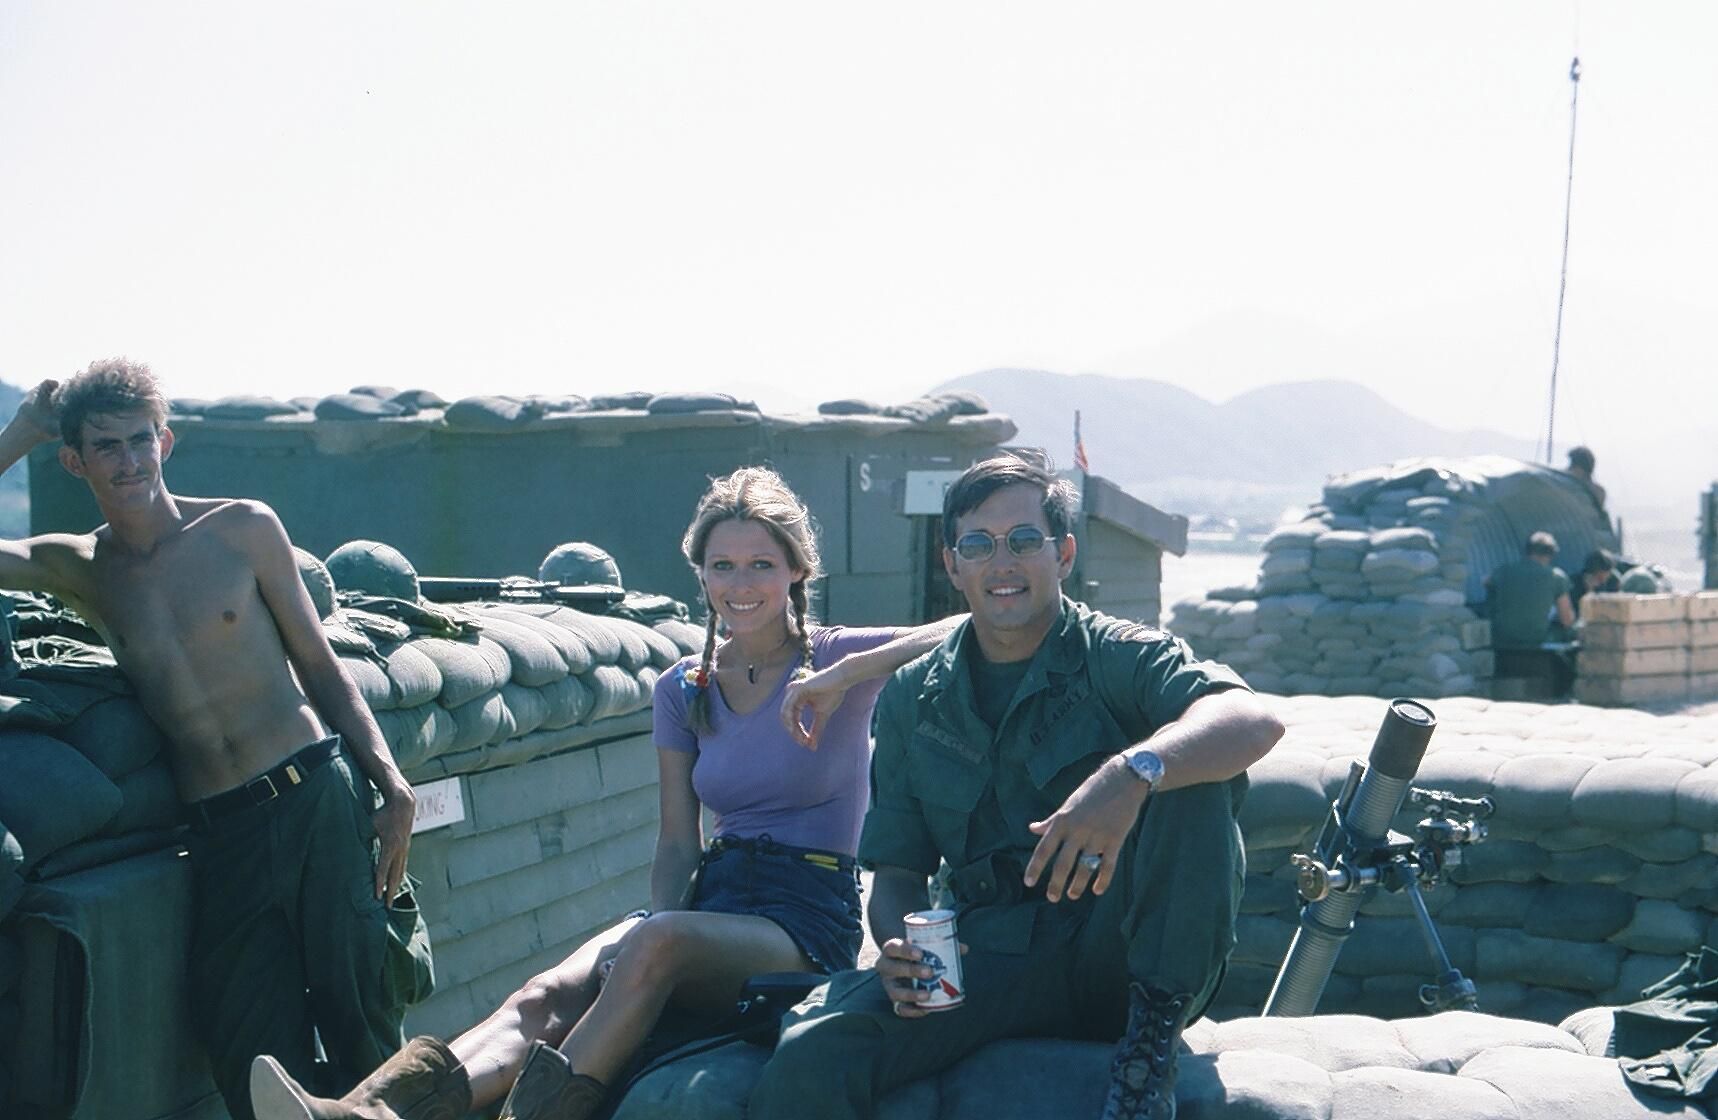 My dad drinking PBR with a Playboy Bunny in Vietnam, 1969.